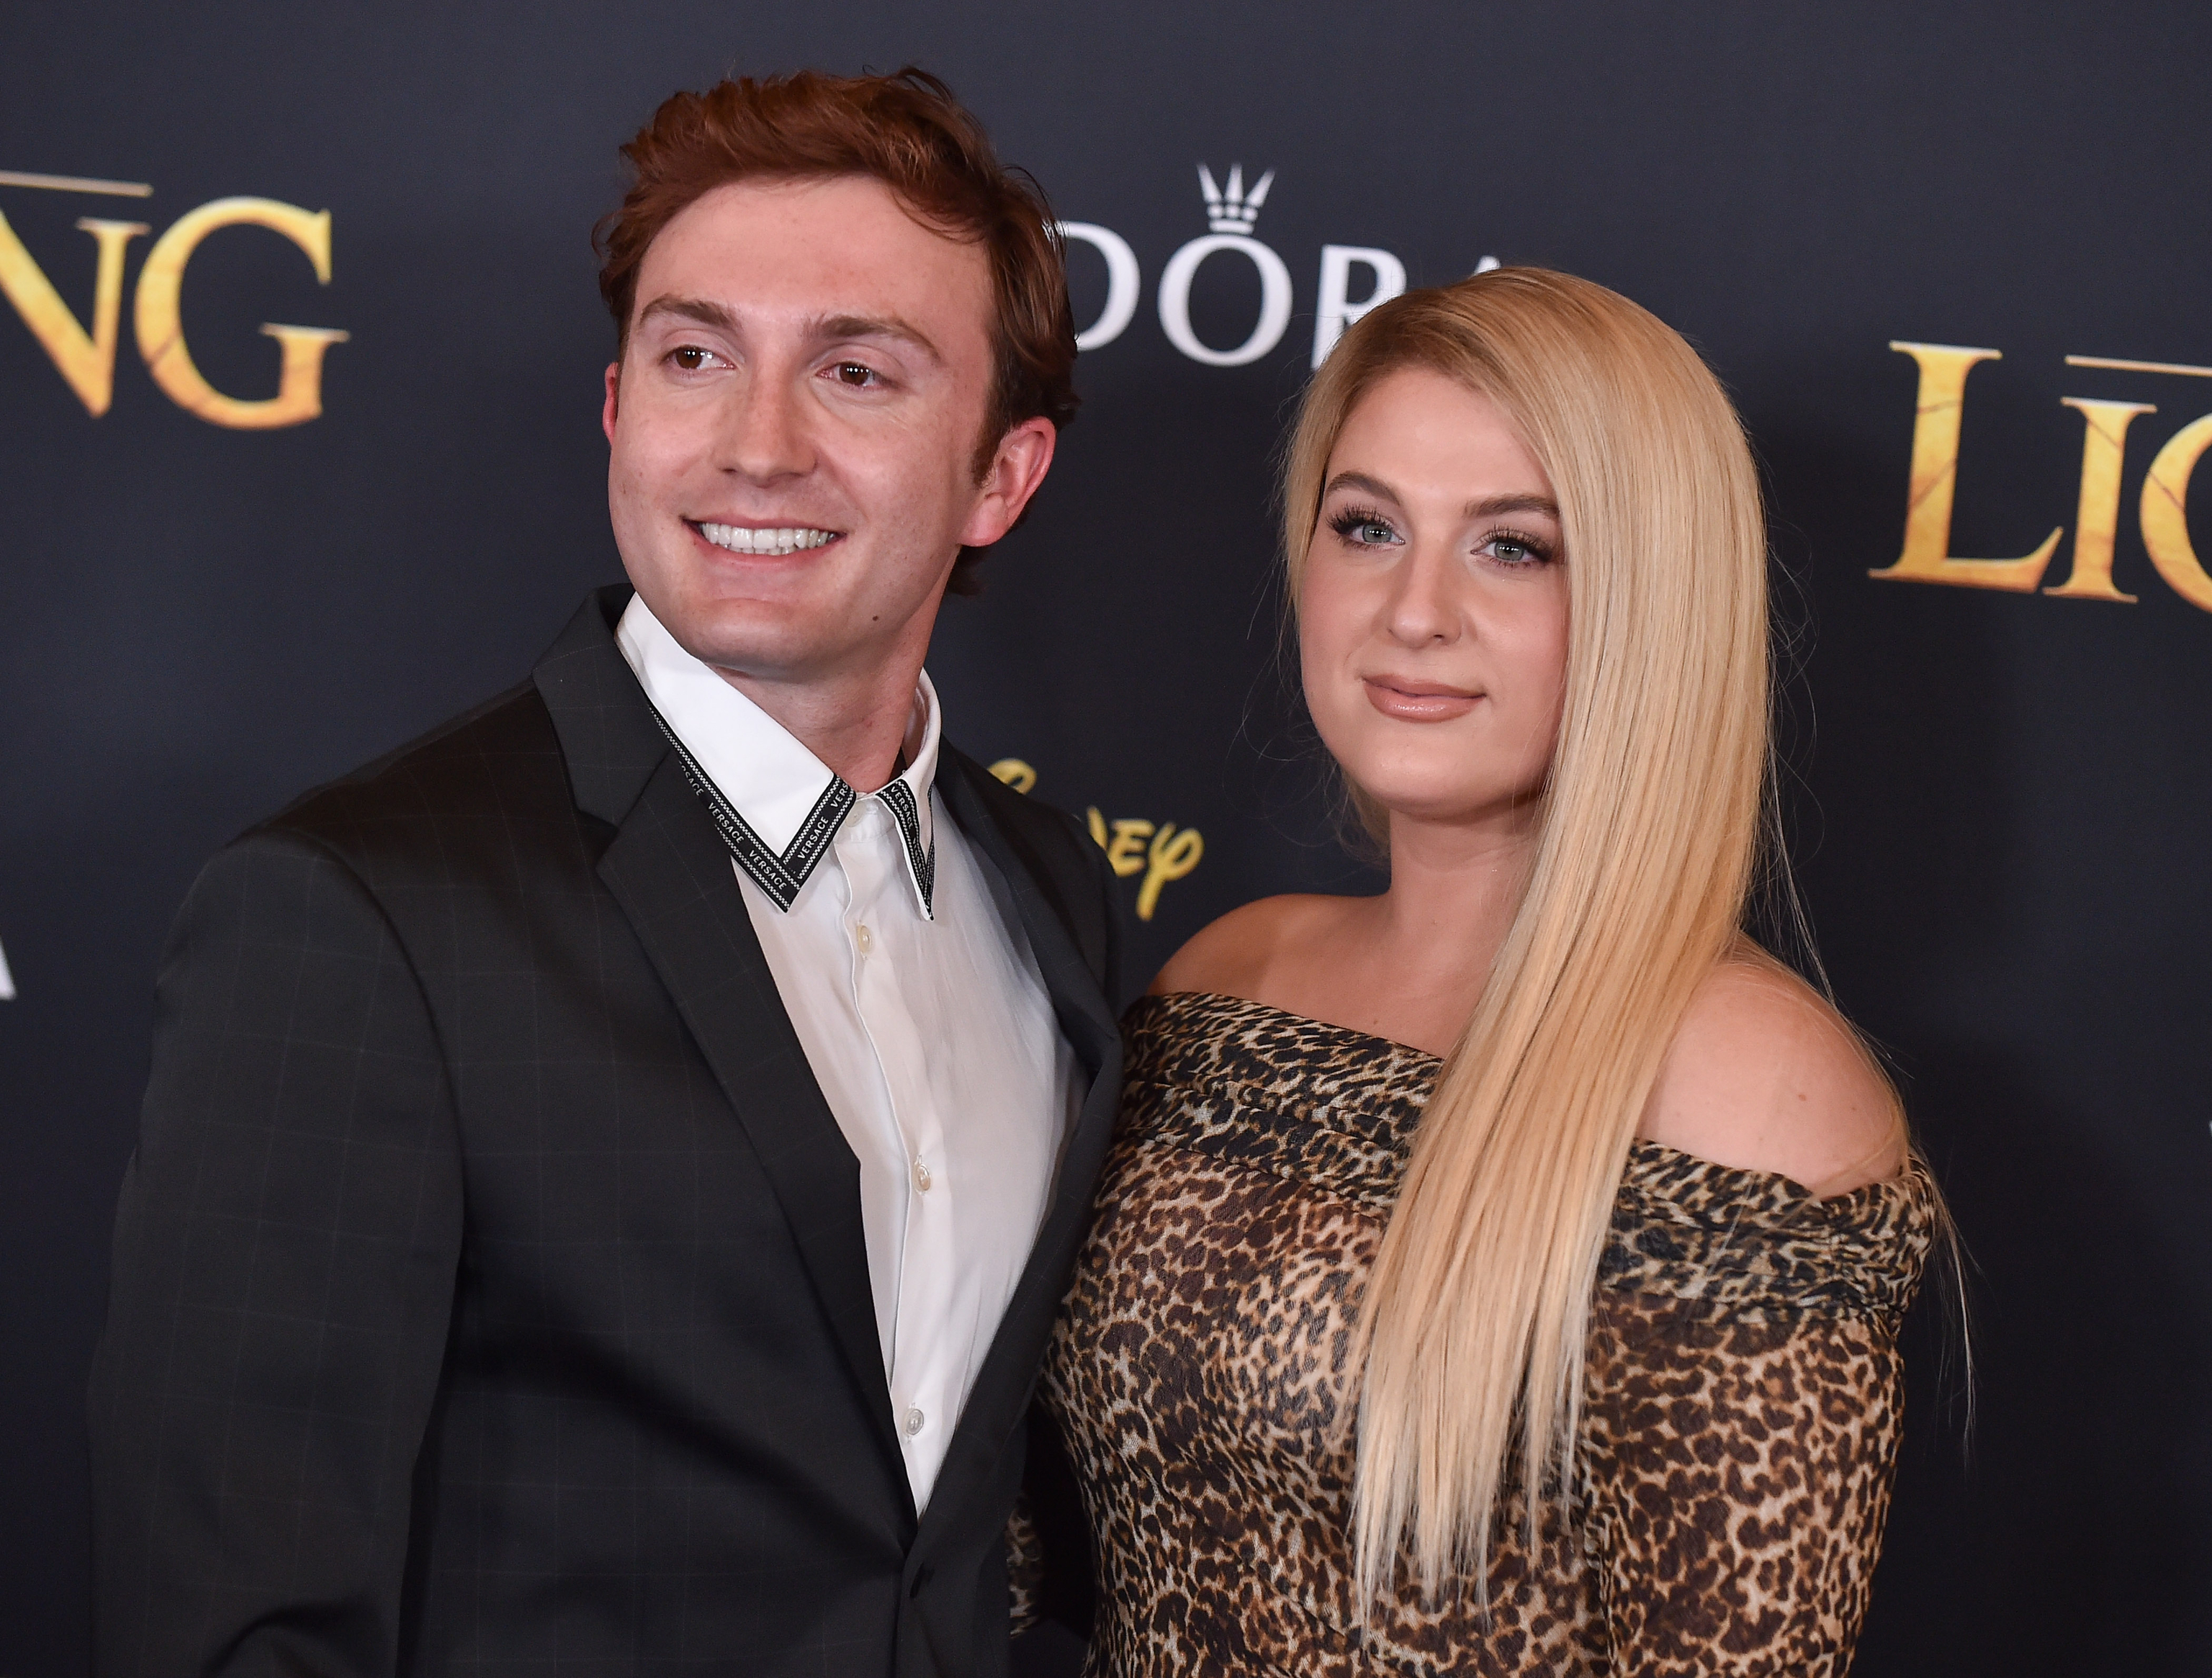 Daryl Sabara and Meghan Trainor arrive at Disney's 'The Lion King' world premiere on 2019